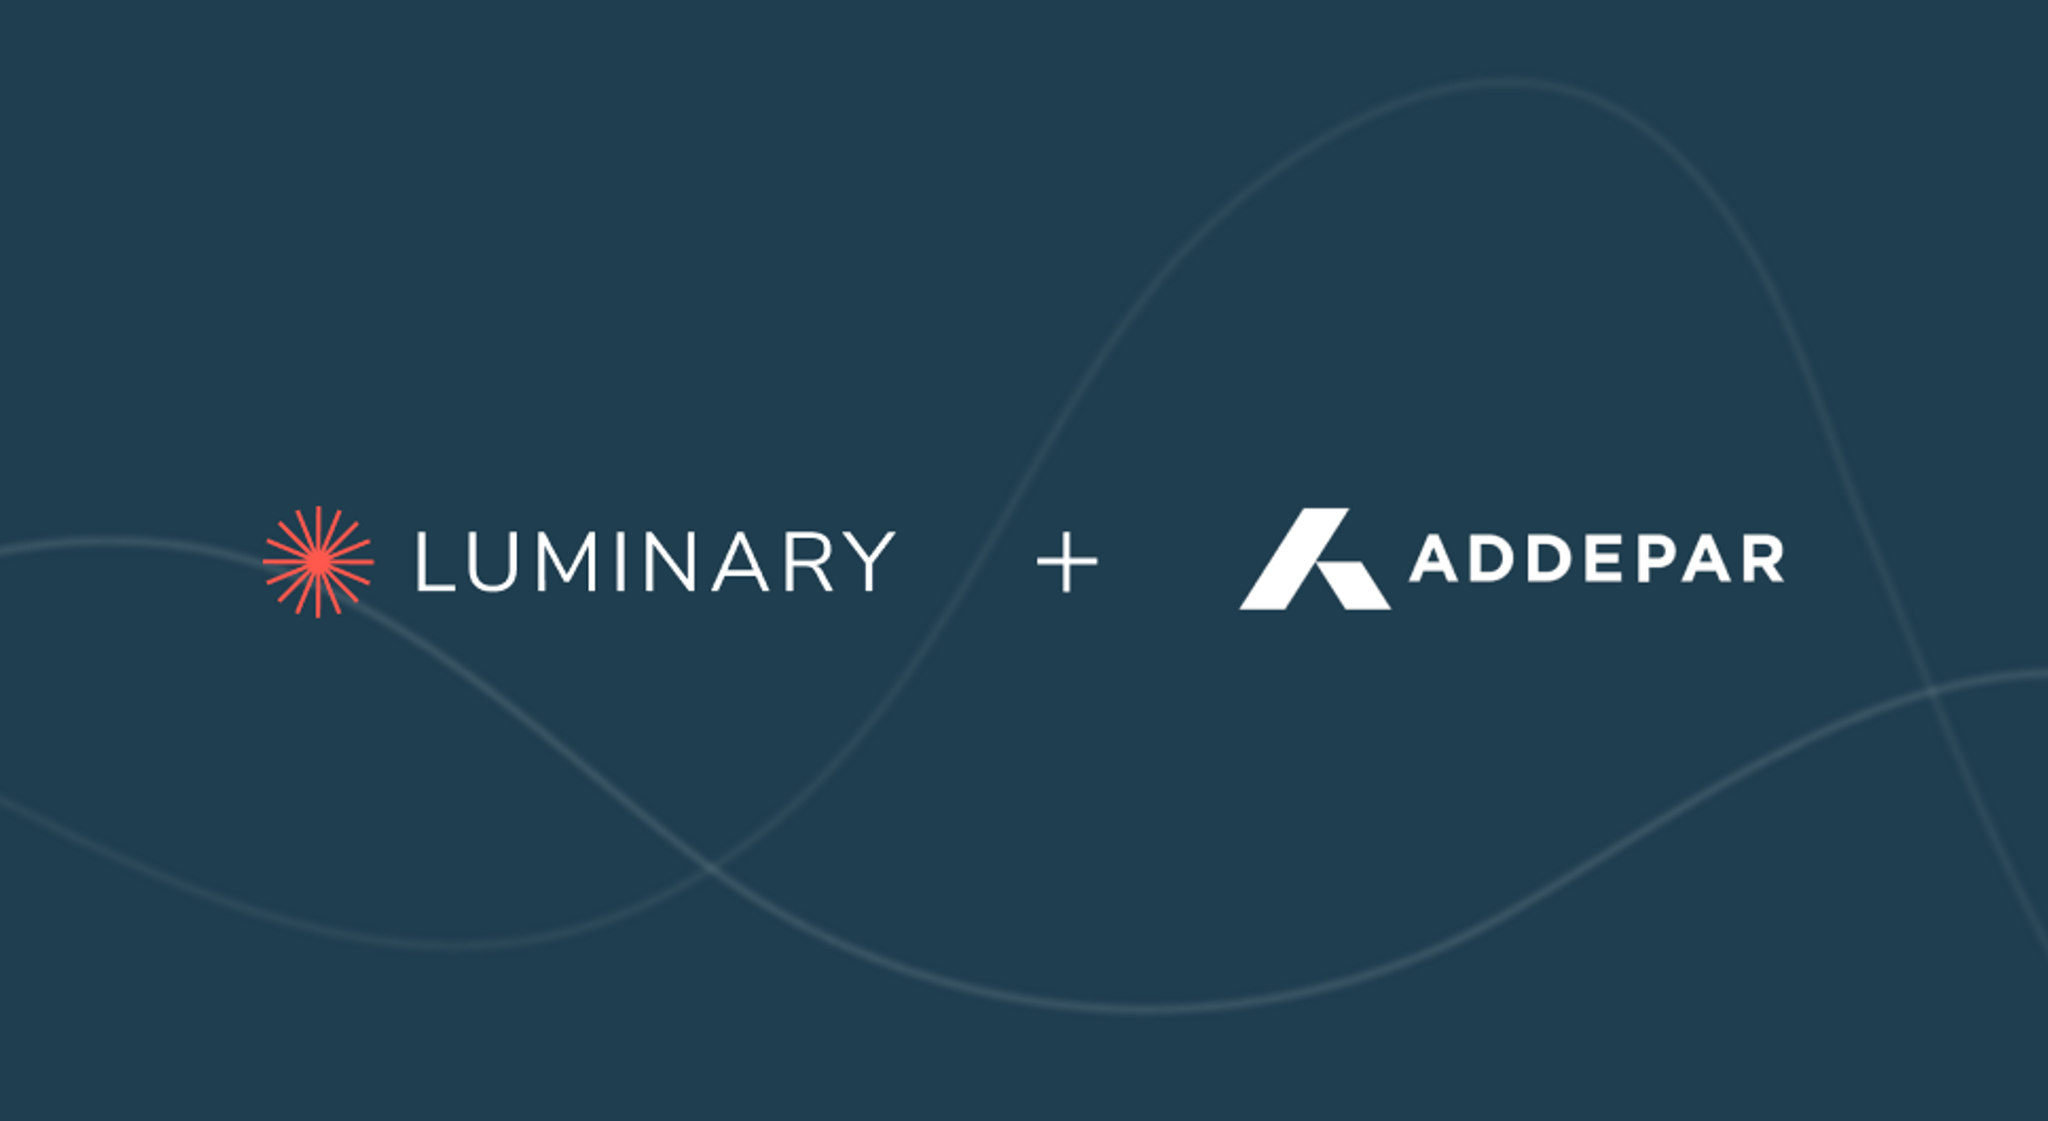 Luminary + Addepar: A new integration to streamline and elevate trust & estate planning